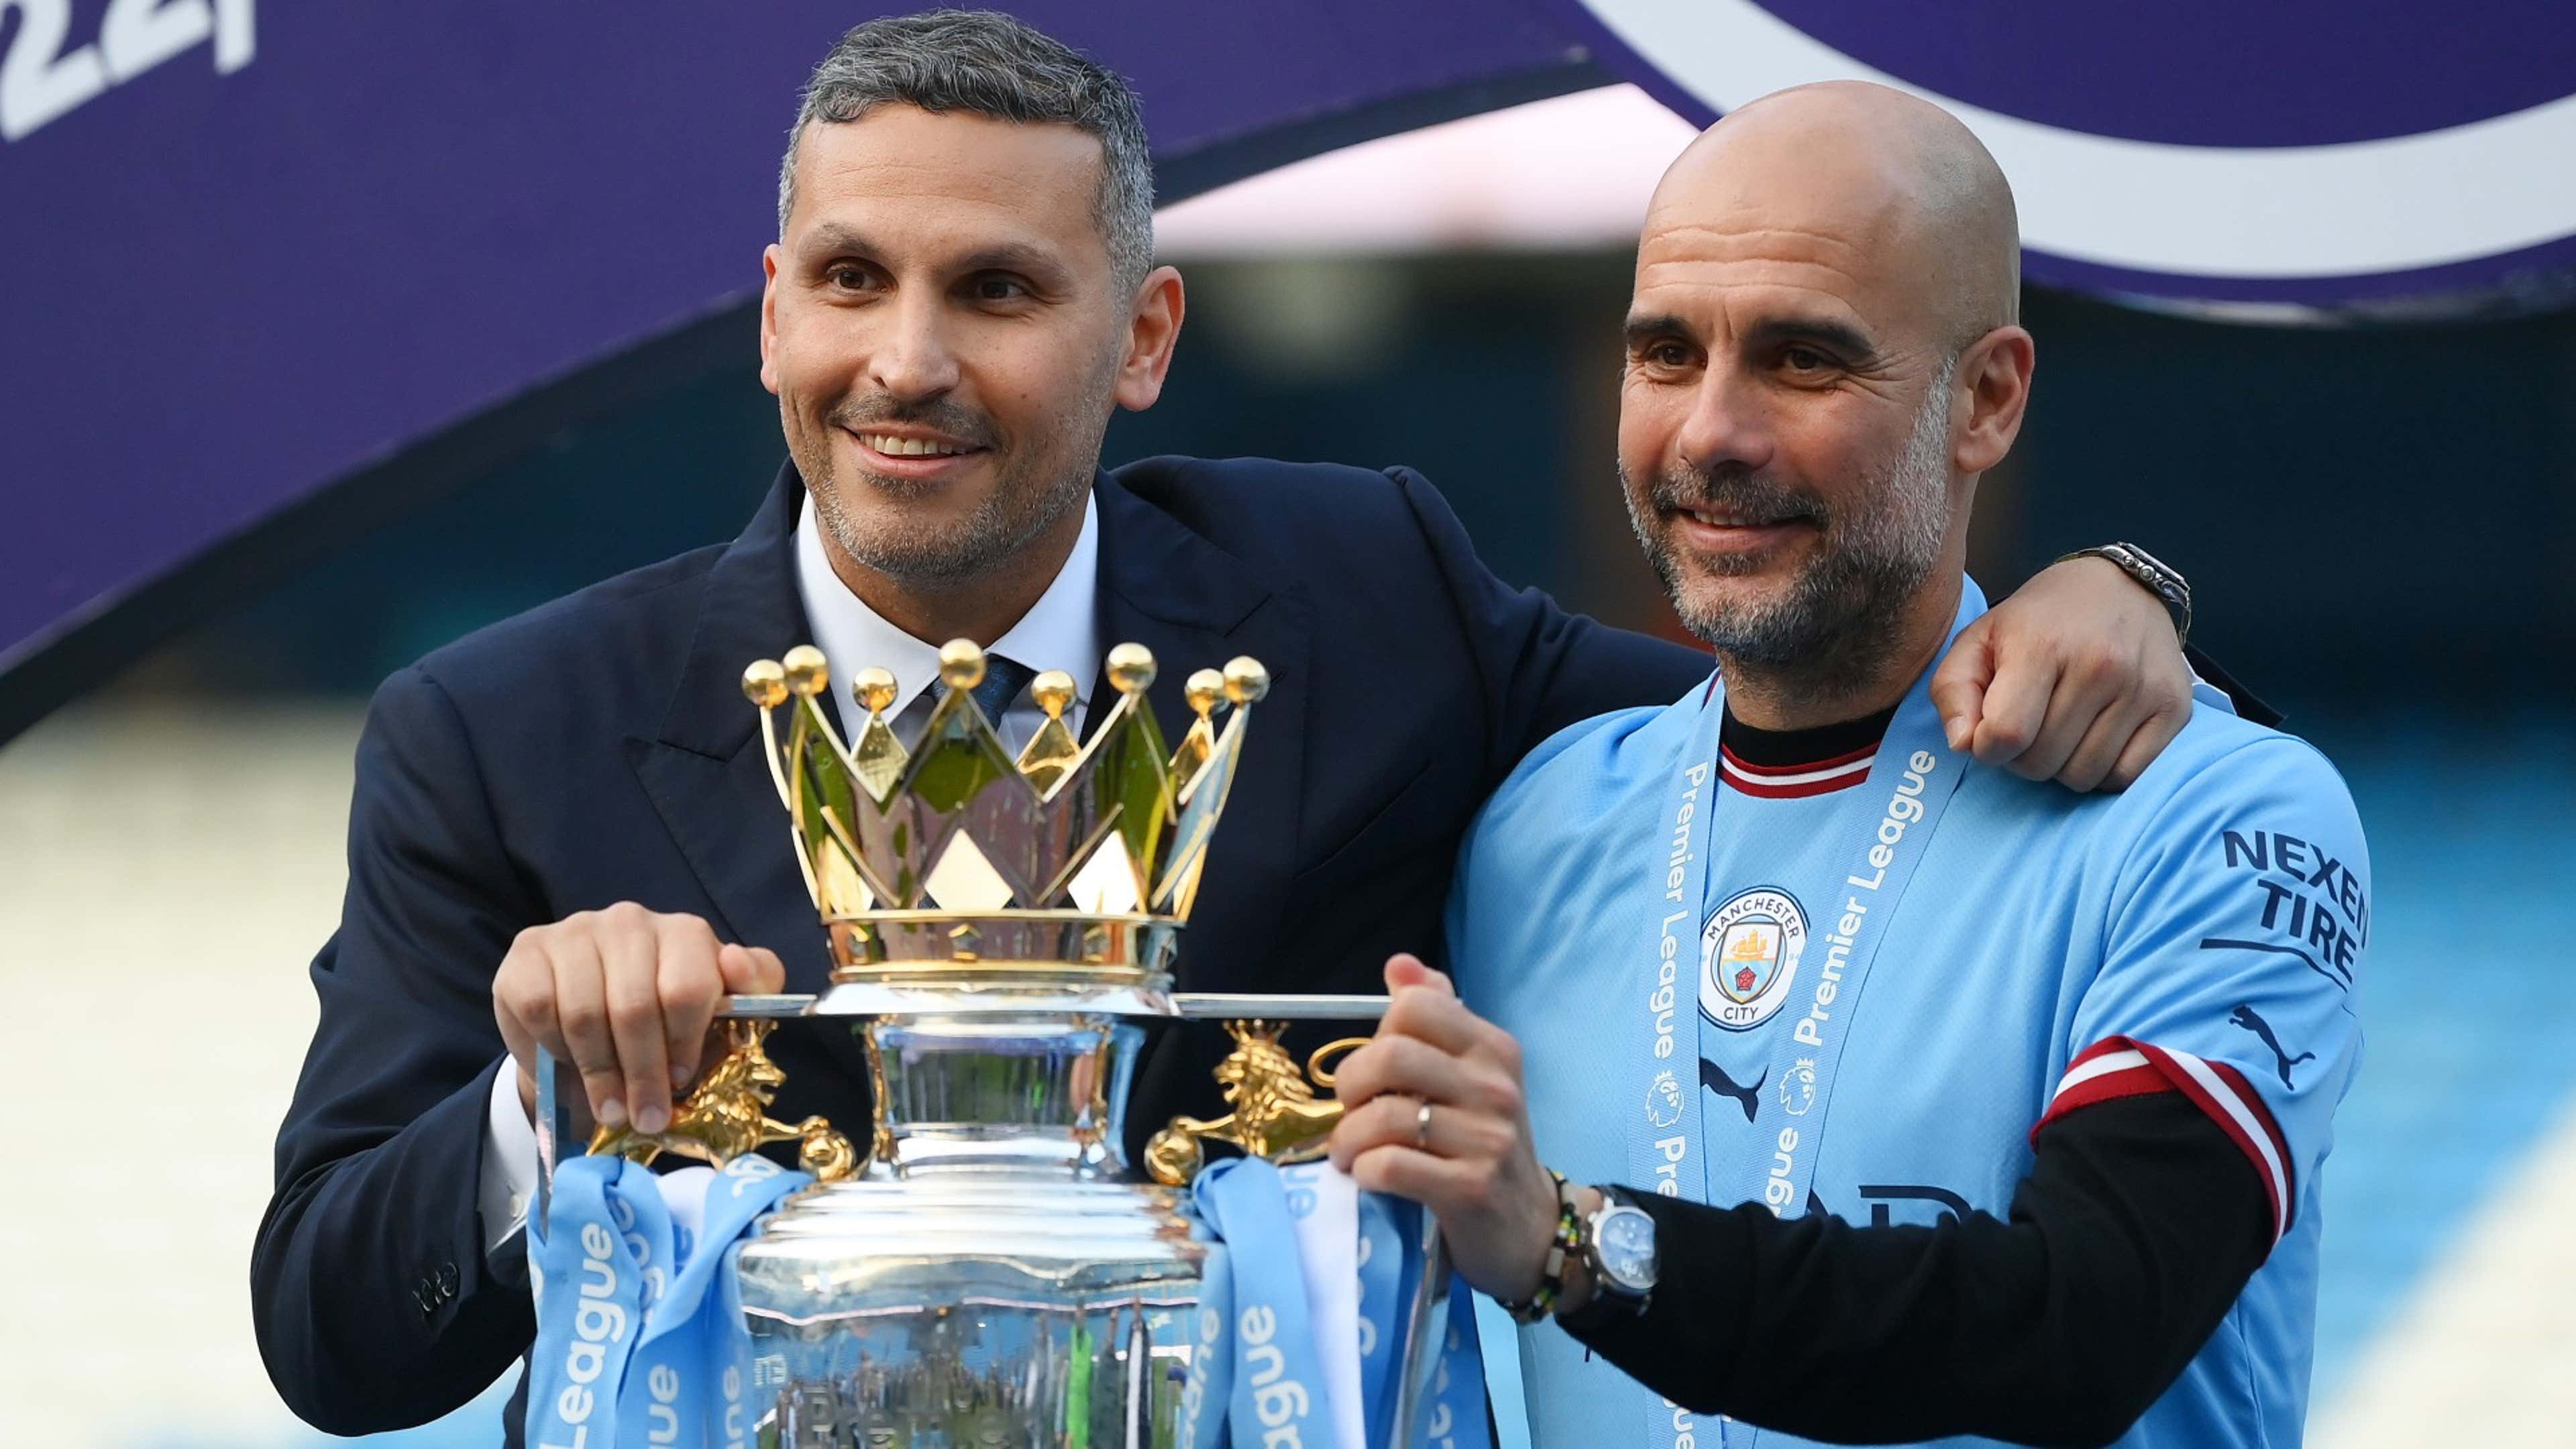 Khaldoon Al Mubarak, Chairman of Manchester City, poses for a photograph with the Premier League Trophy and Pep Guardiola, Manager of Manchester City